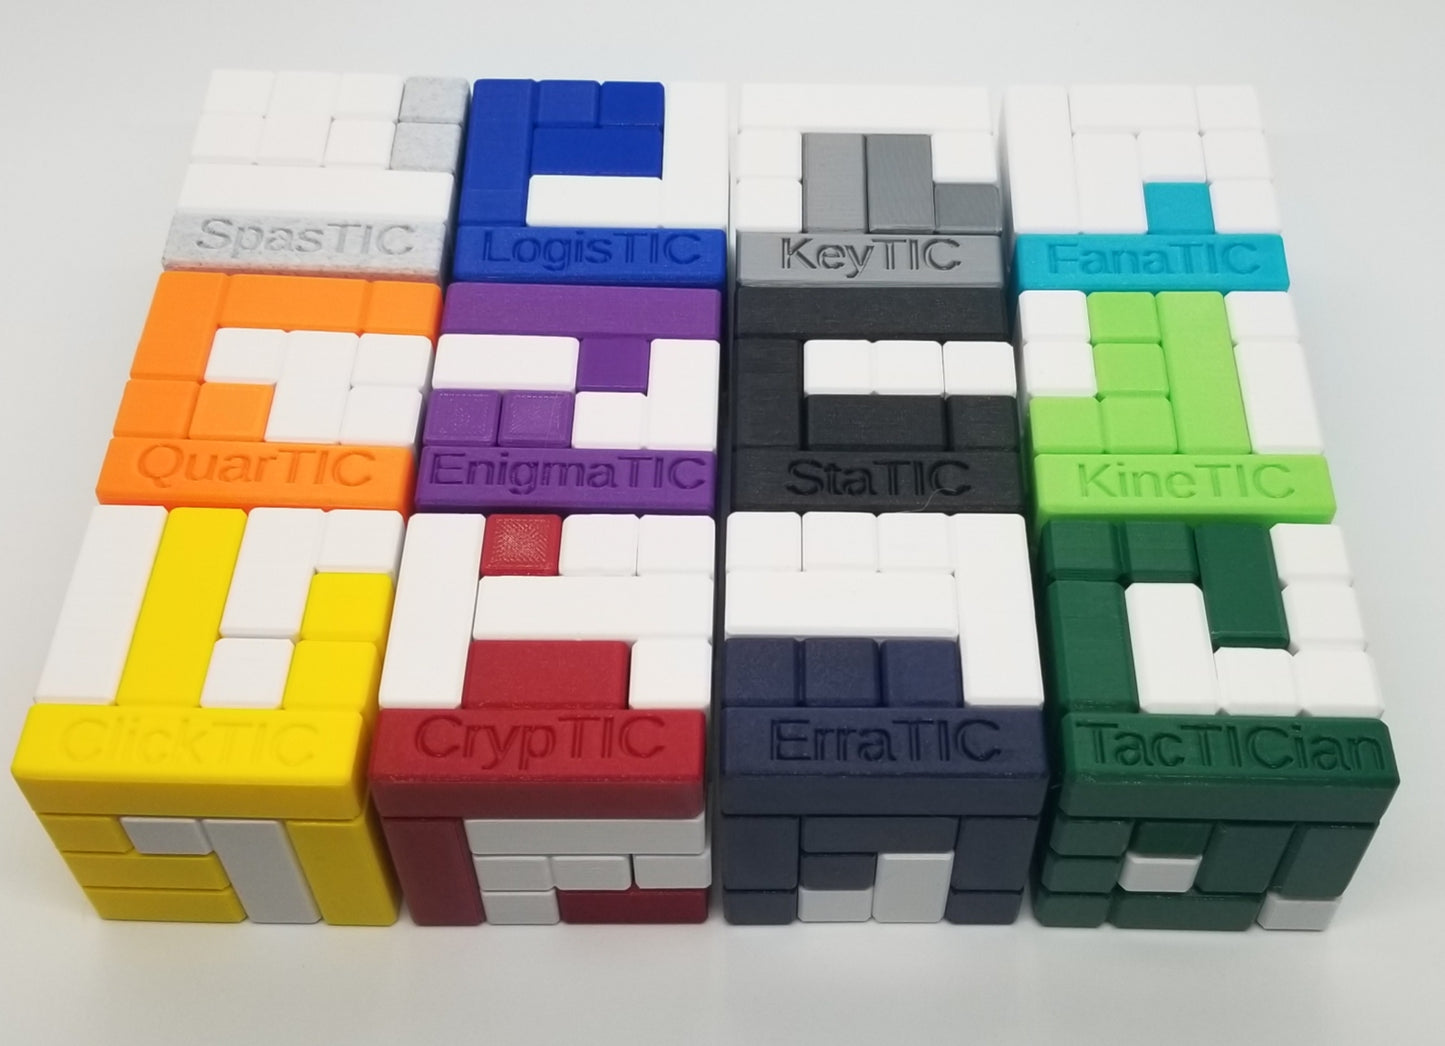 Download 3D Printable STL Files for Volume 1 of the 6 Piece Turning Interlocking Cube Puzzles